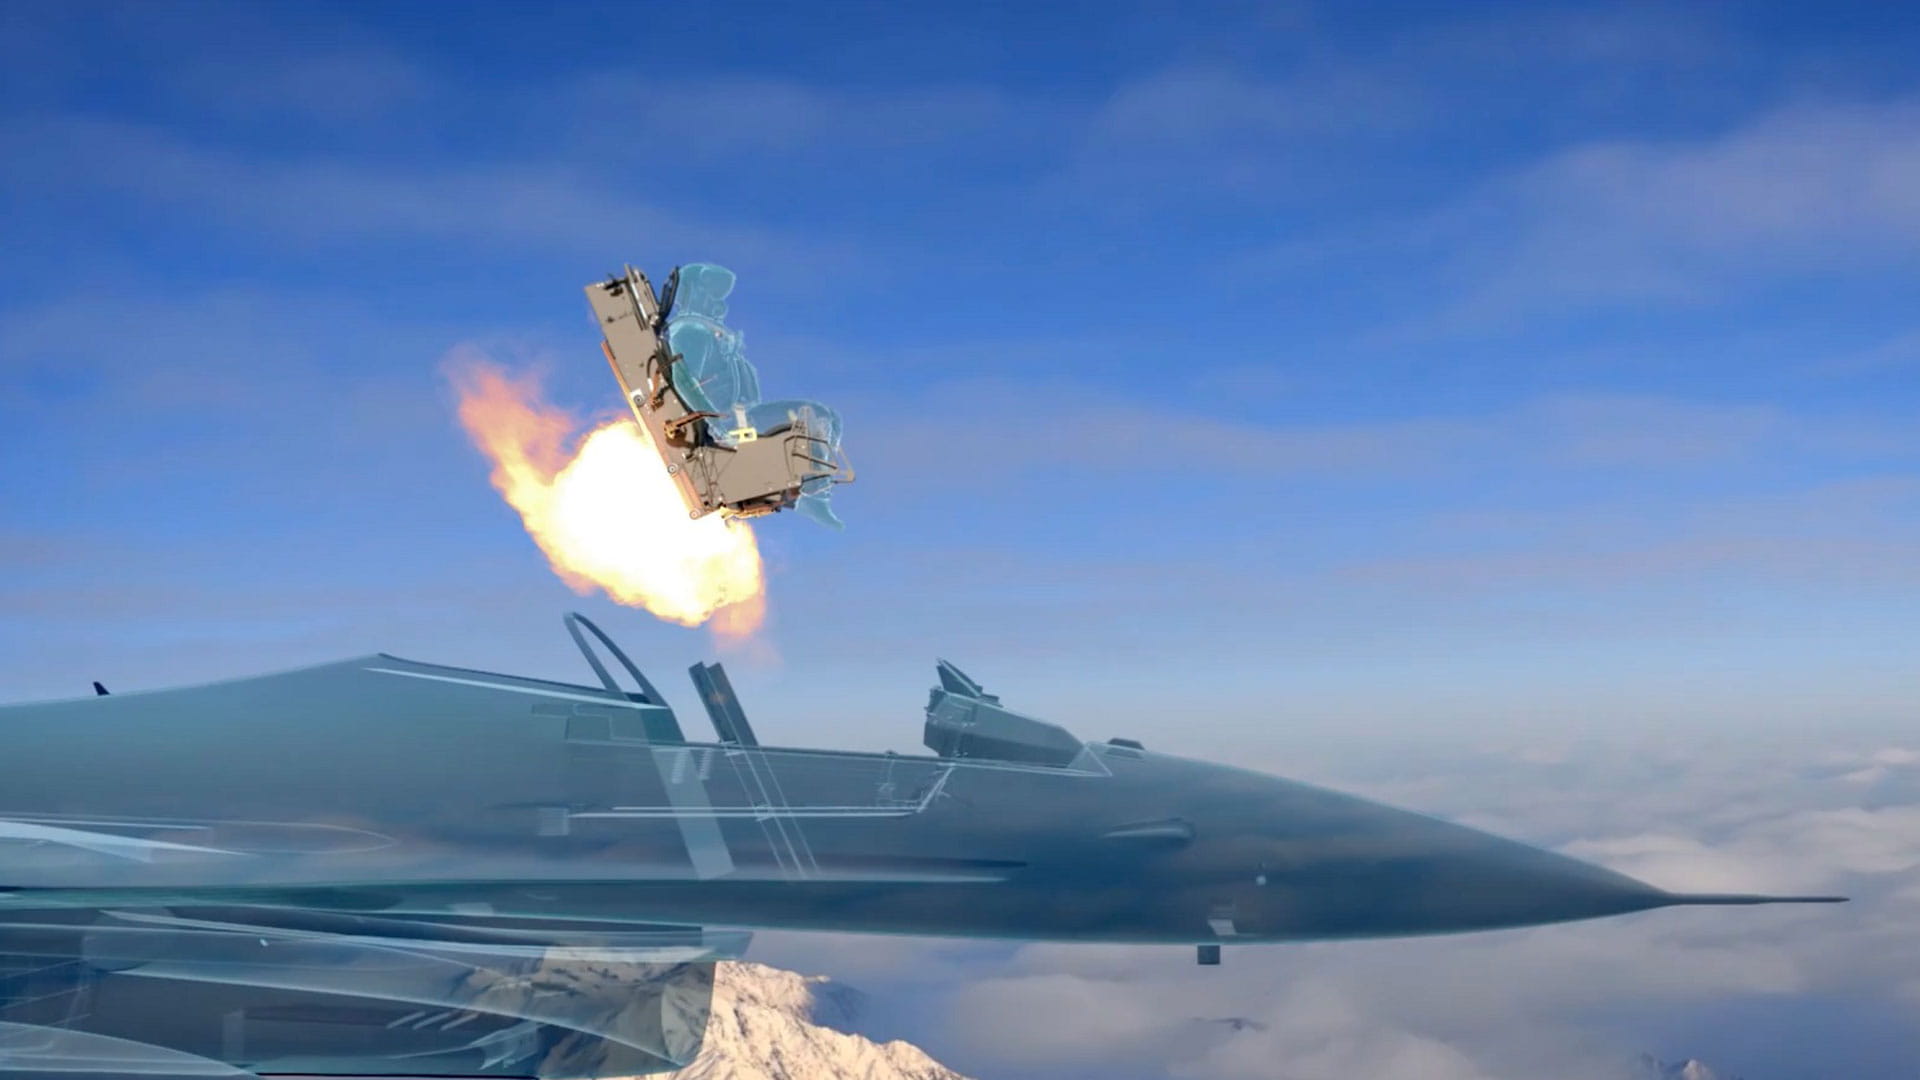 Ejection seat deploying